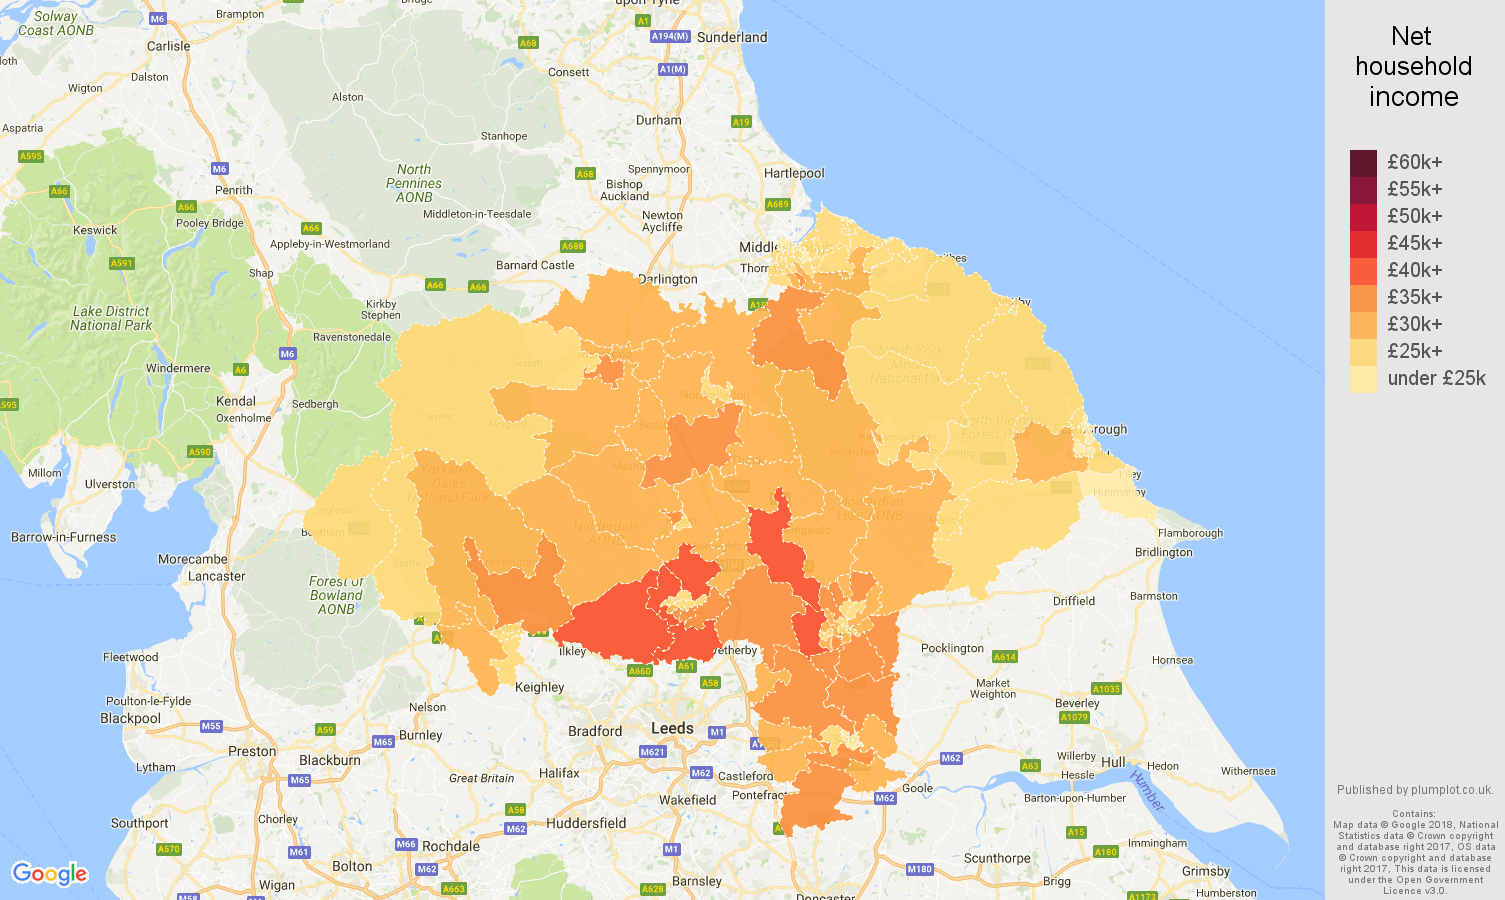 North Yorkshire net household income map